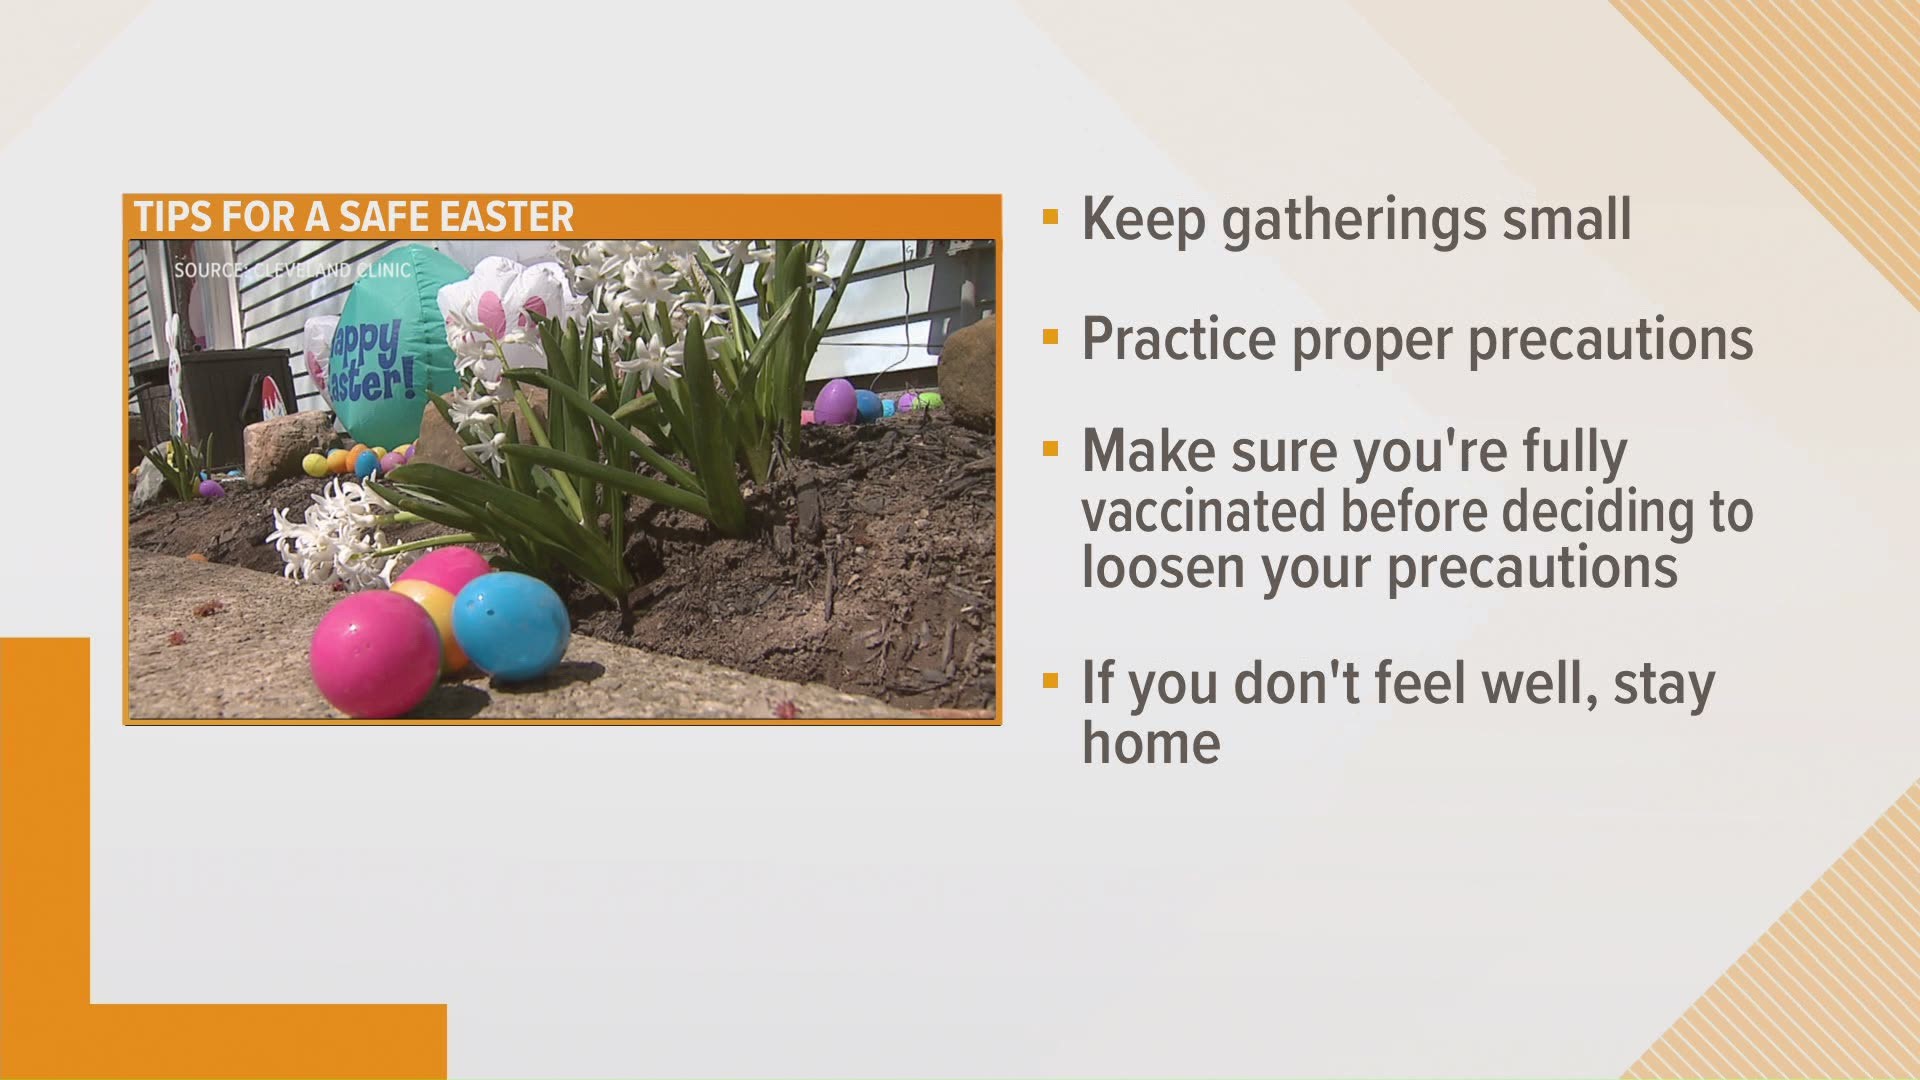 An infectious disease specialist offers advice on ways to stay safe while celebrating Easter with your family.